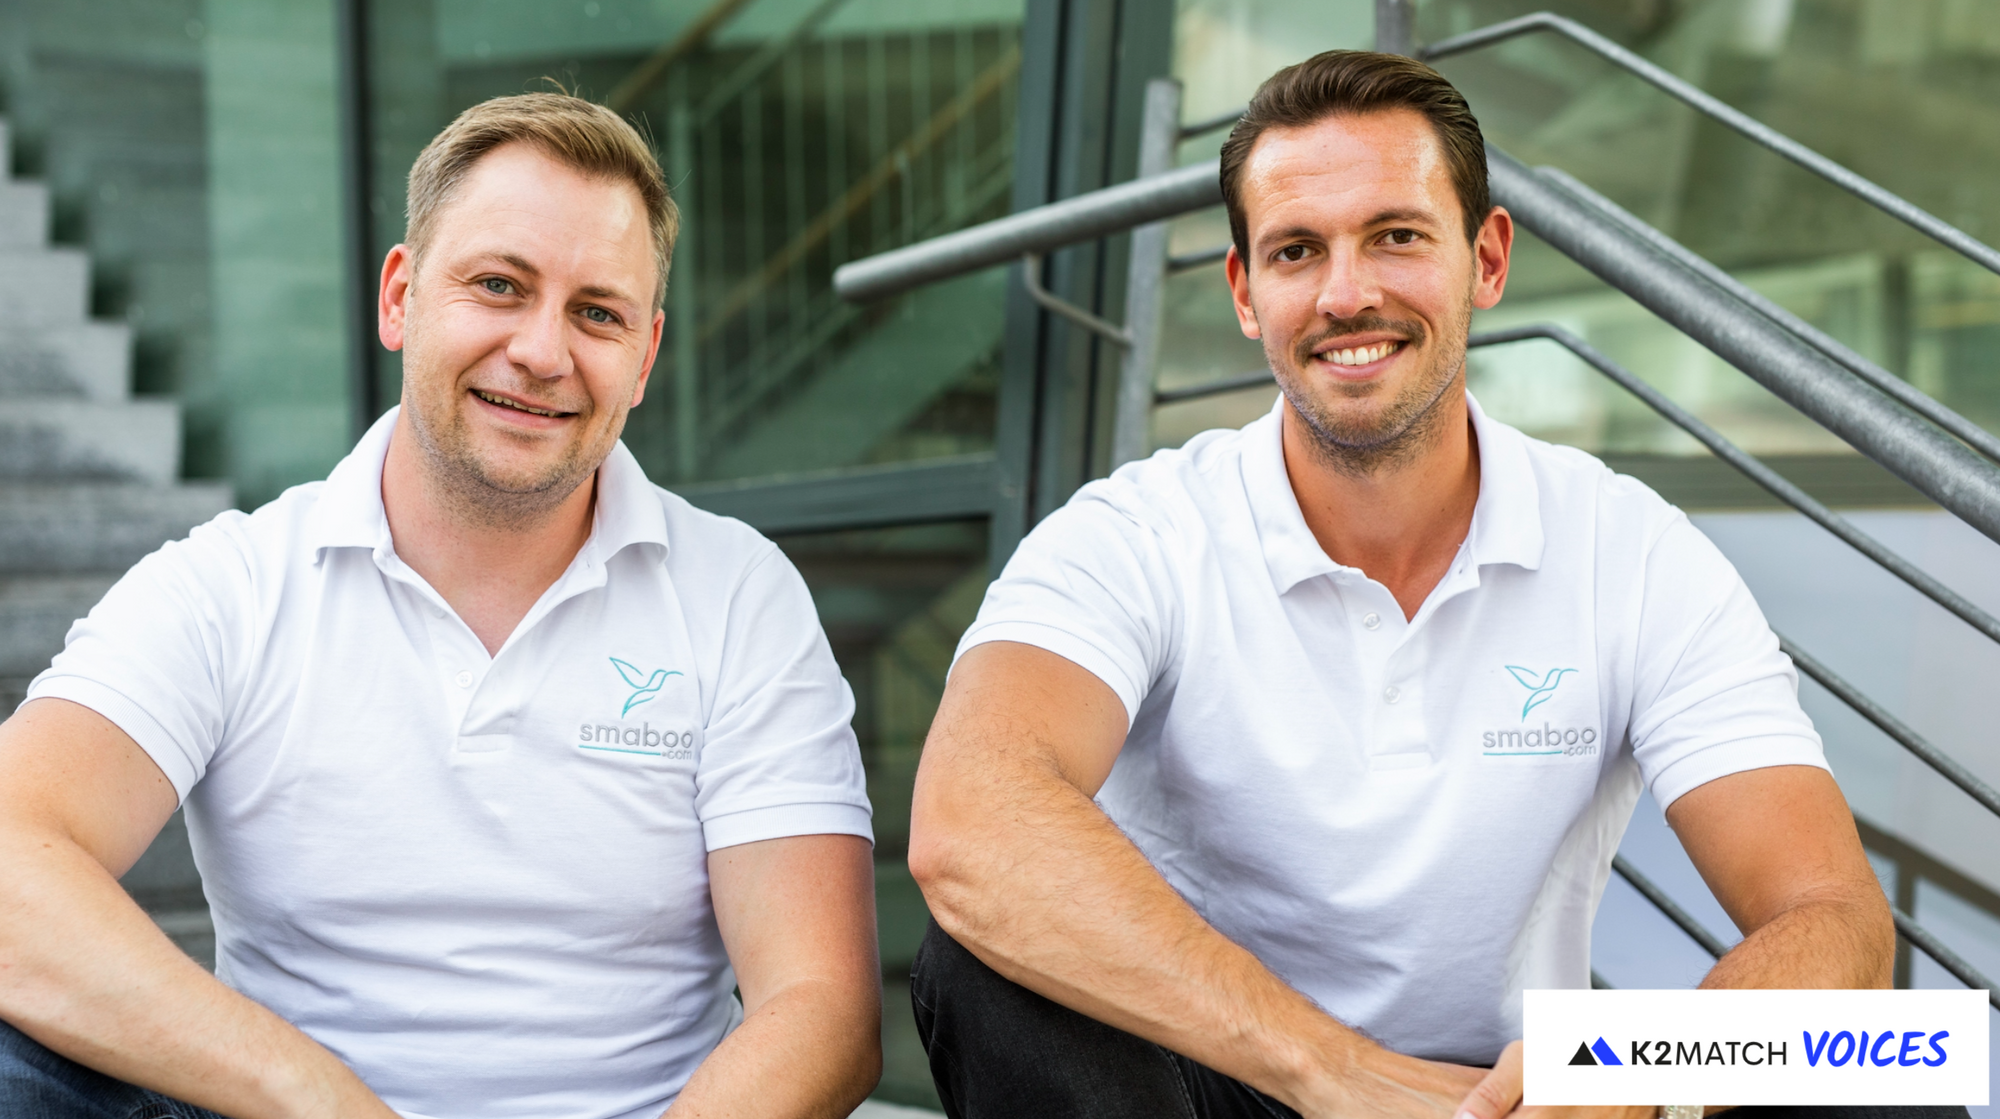 Konstantin Brockmann (left) and Christoph Paulus (right), CO-Founder of smaboo